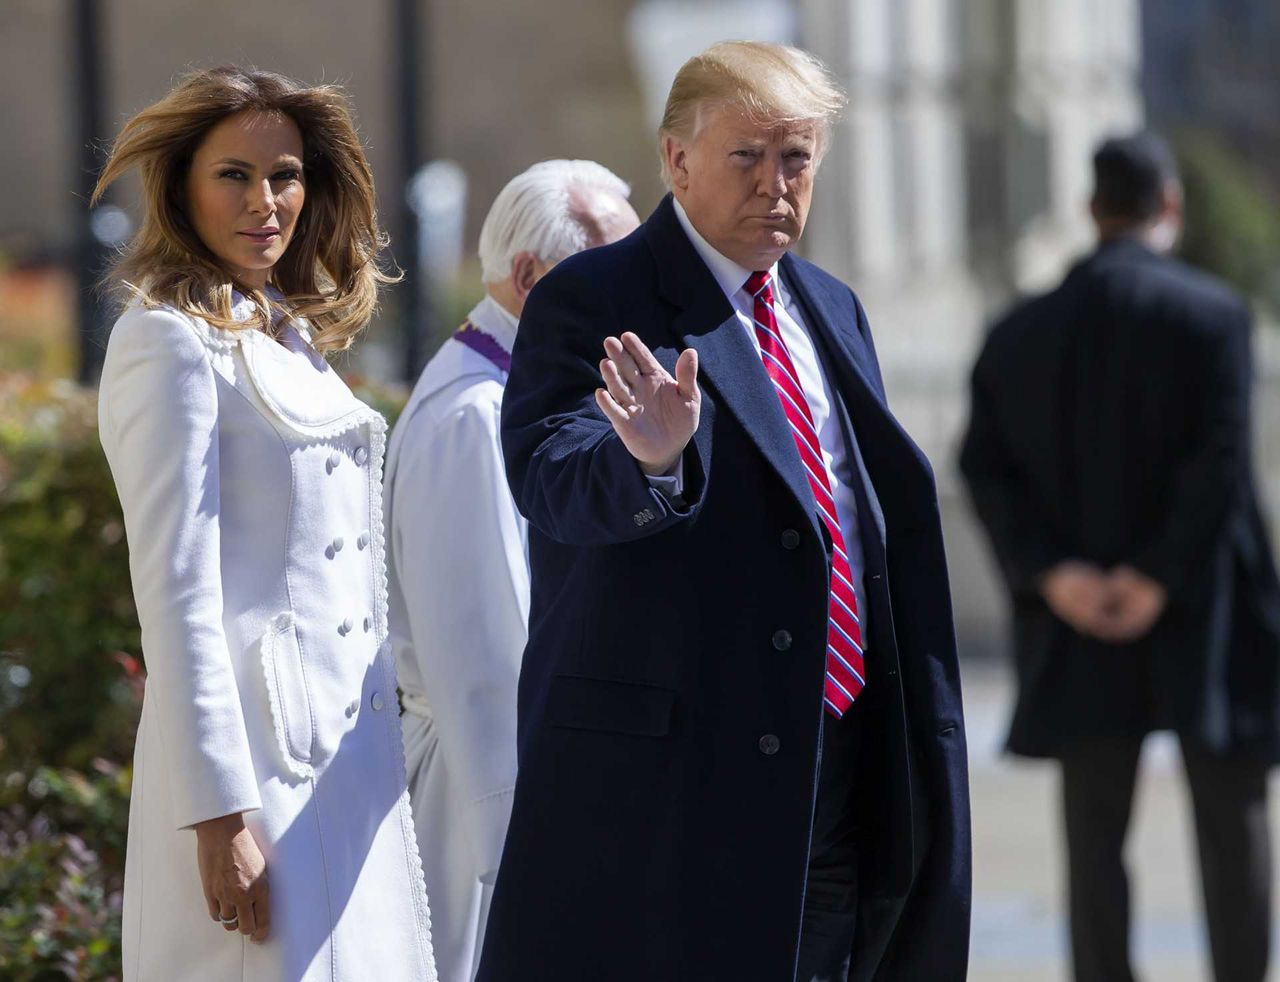 United States President Donald J. Trump (R) and First Lady Melania Trump (L) depart after attending services at St. John's Episcopal Church in Washington, DC, USA, 17 March 2019. The Trumps attended church on St. Patrick's Day.
CAP/MPI/RS
©RS/MPI/Capital Pictures